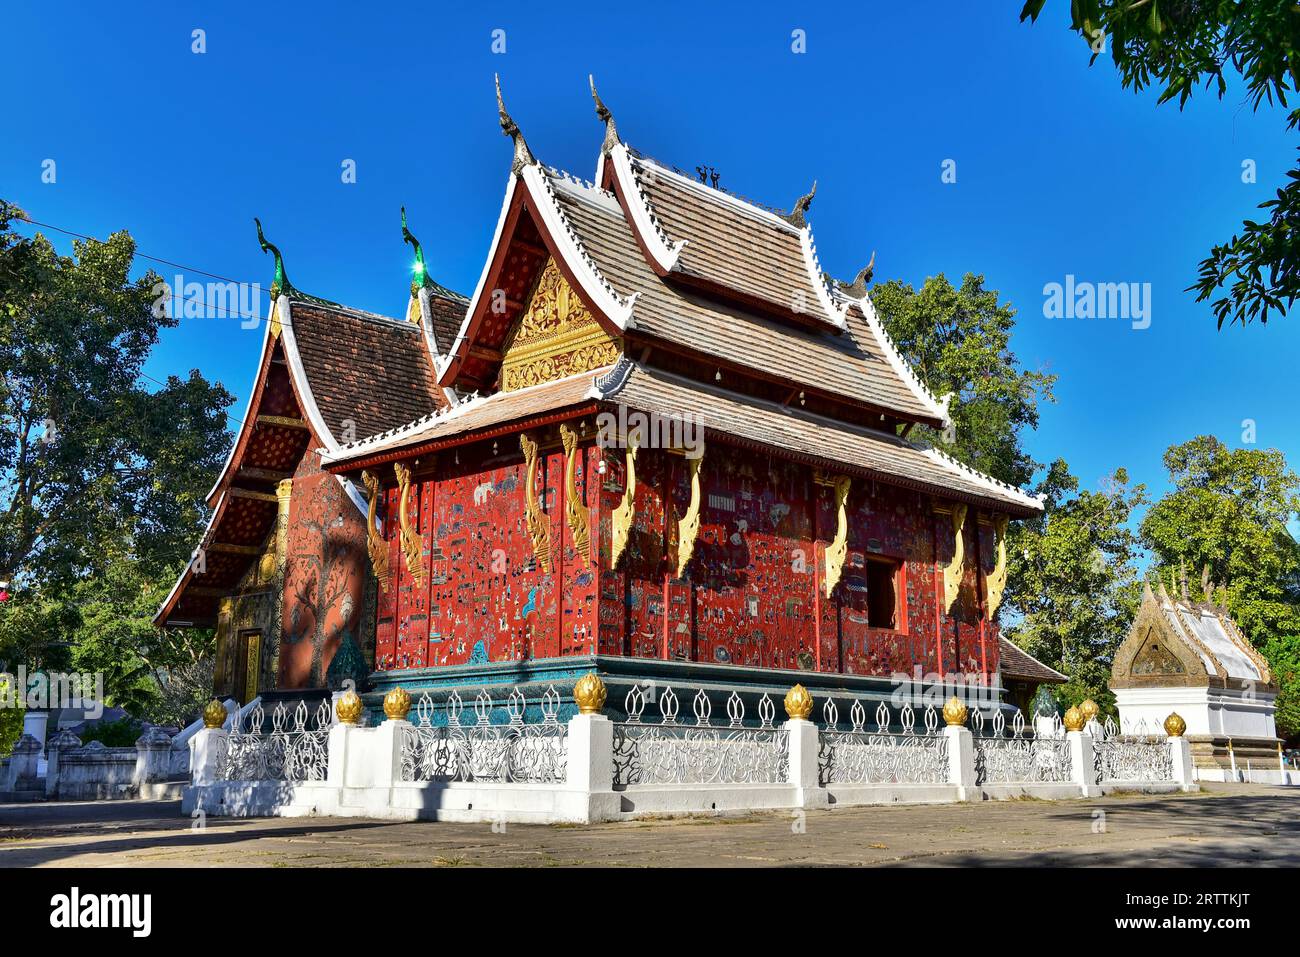 Wat Xieng Thong, the temple with intricate coloured glass mosaic on a stunning red wall amidst a clear blue sky, Dec 2014, Luang Prabang, Laos Stock Photo